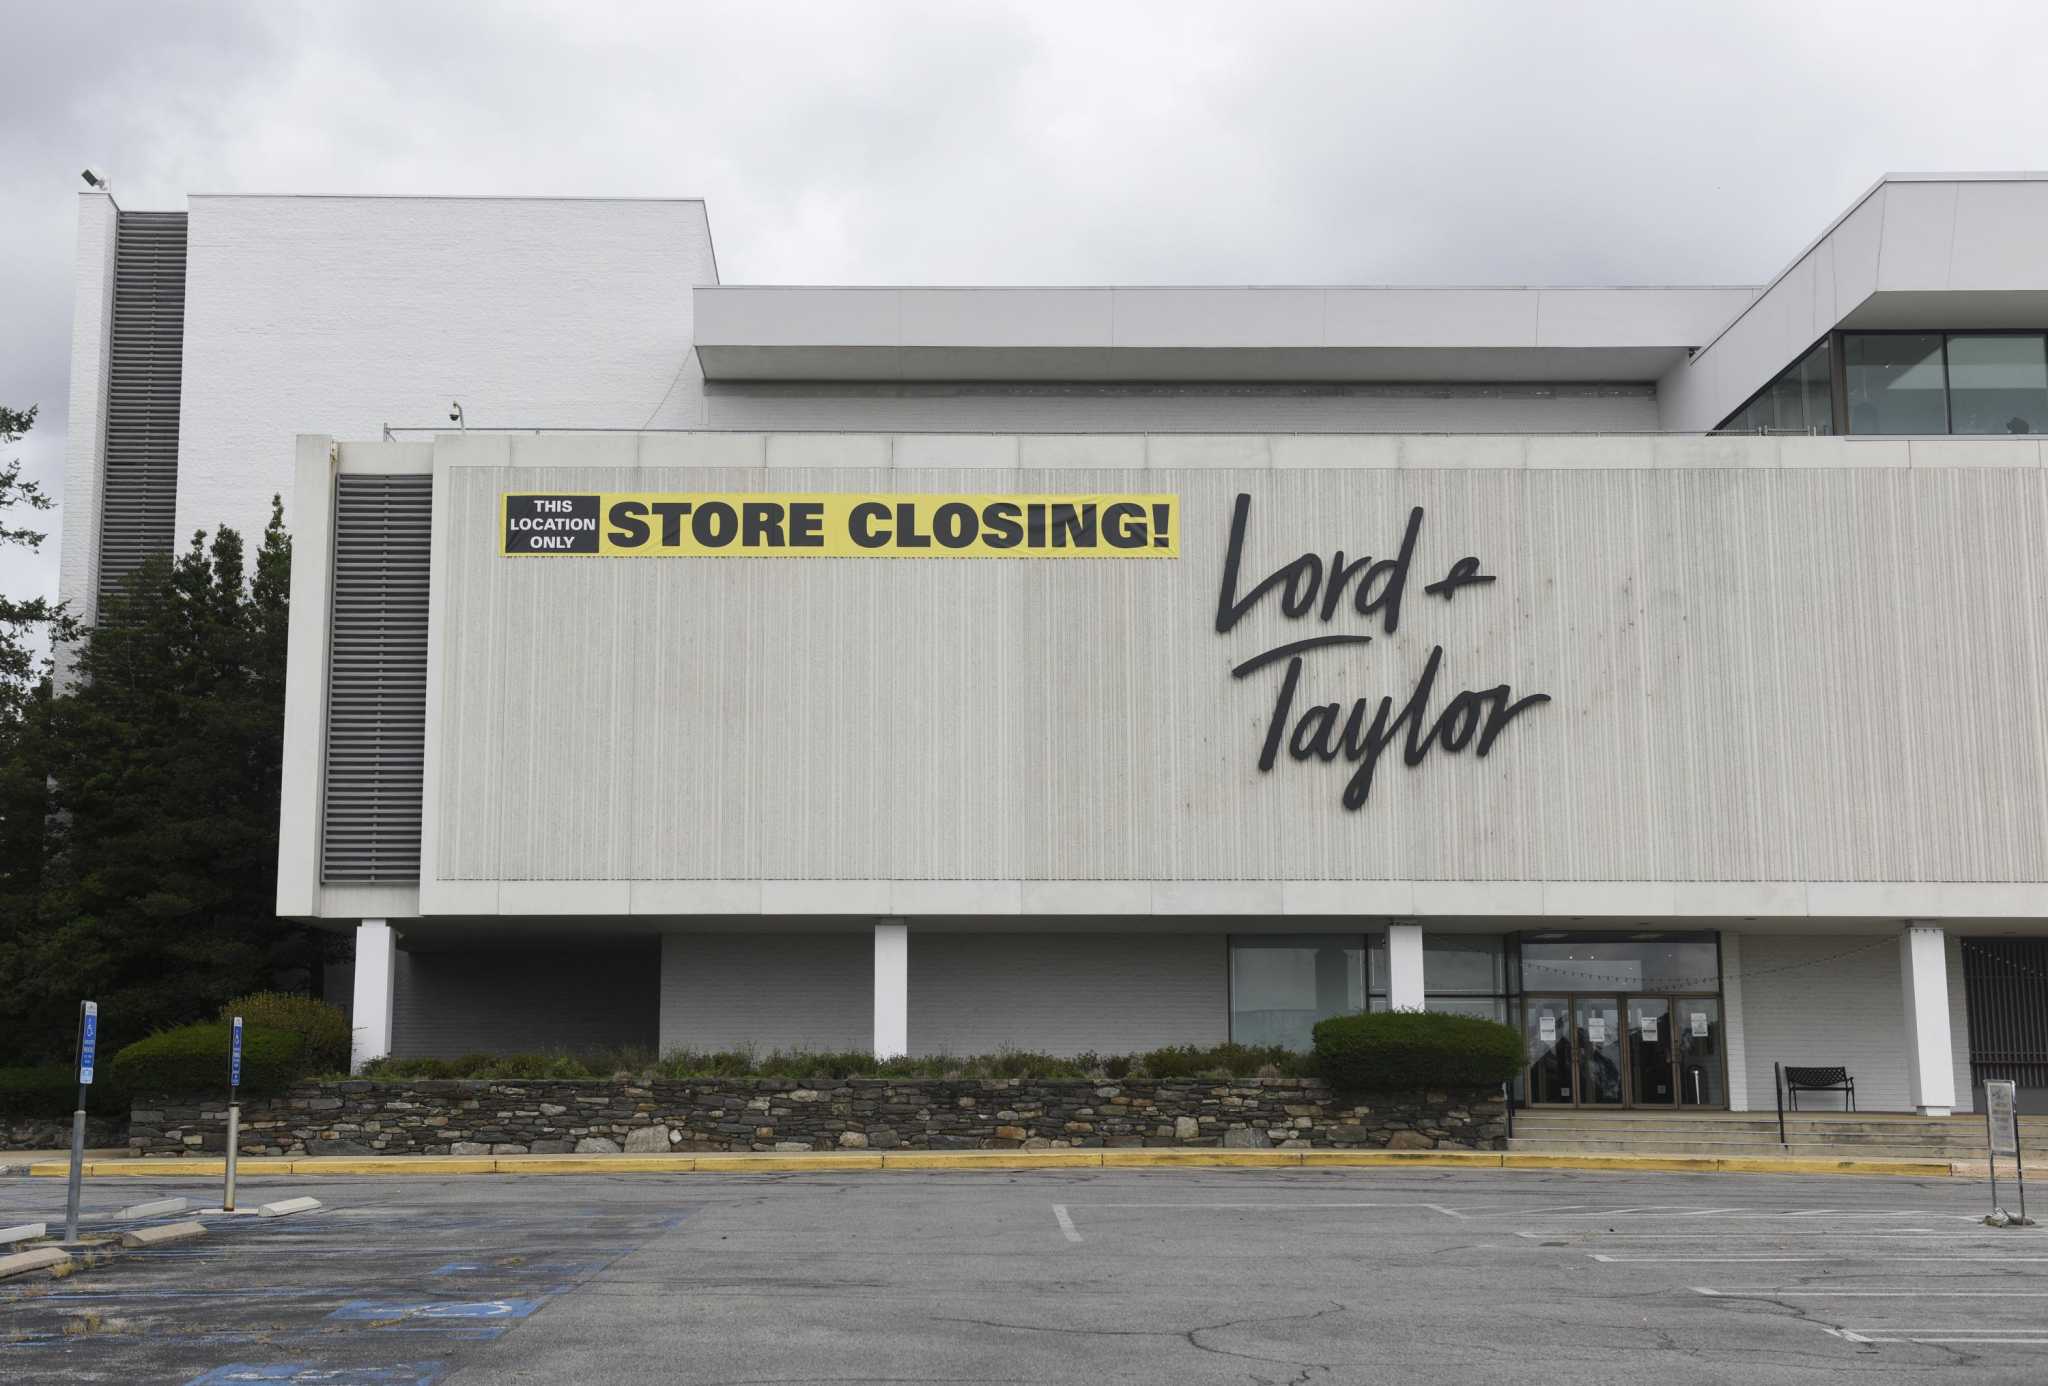 Stamford and Trumbull Lord + Taylor stores to close in early 2021